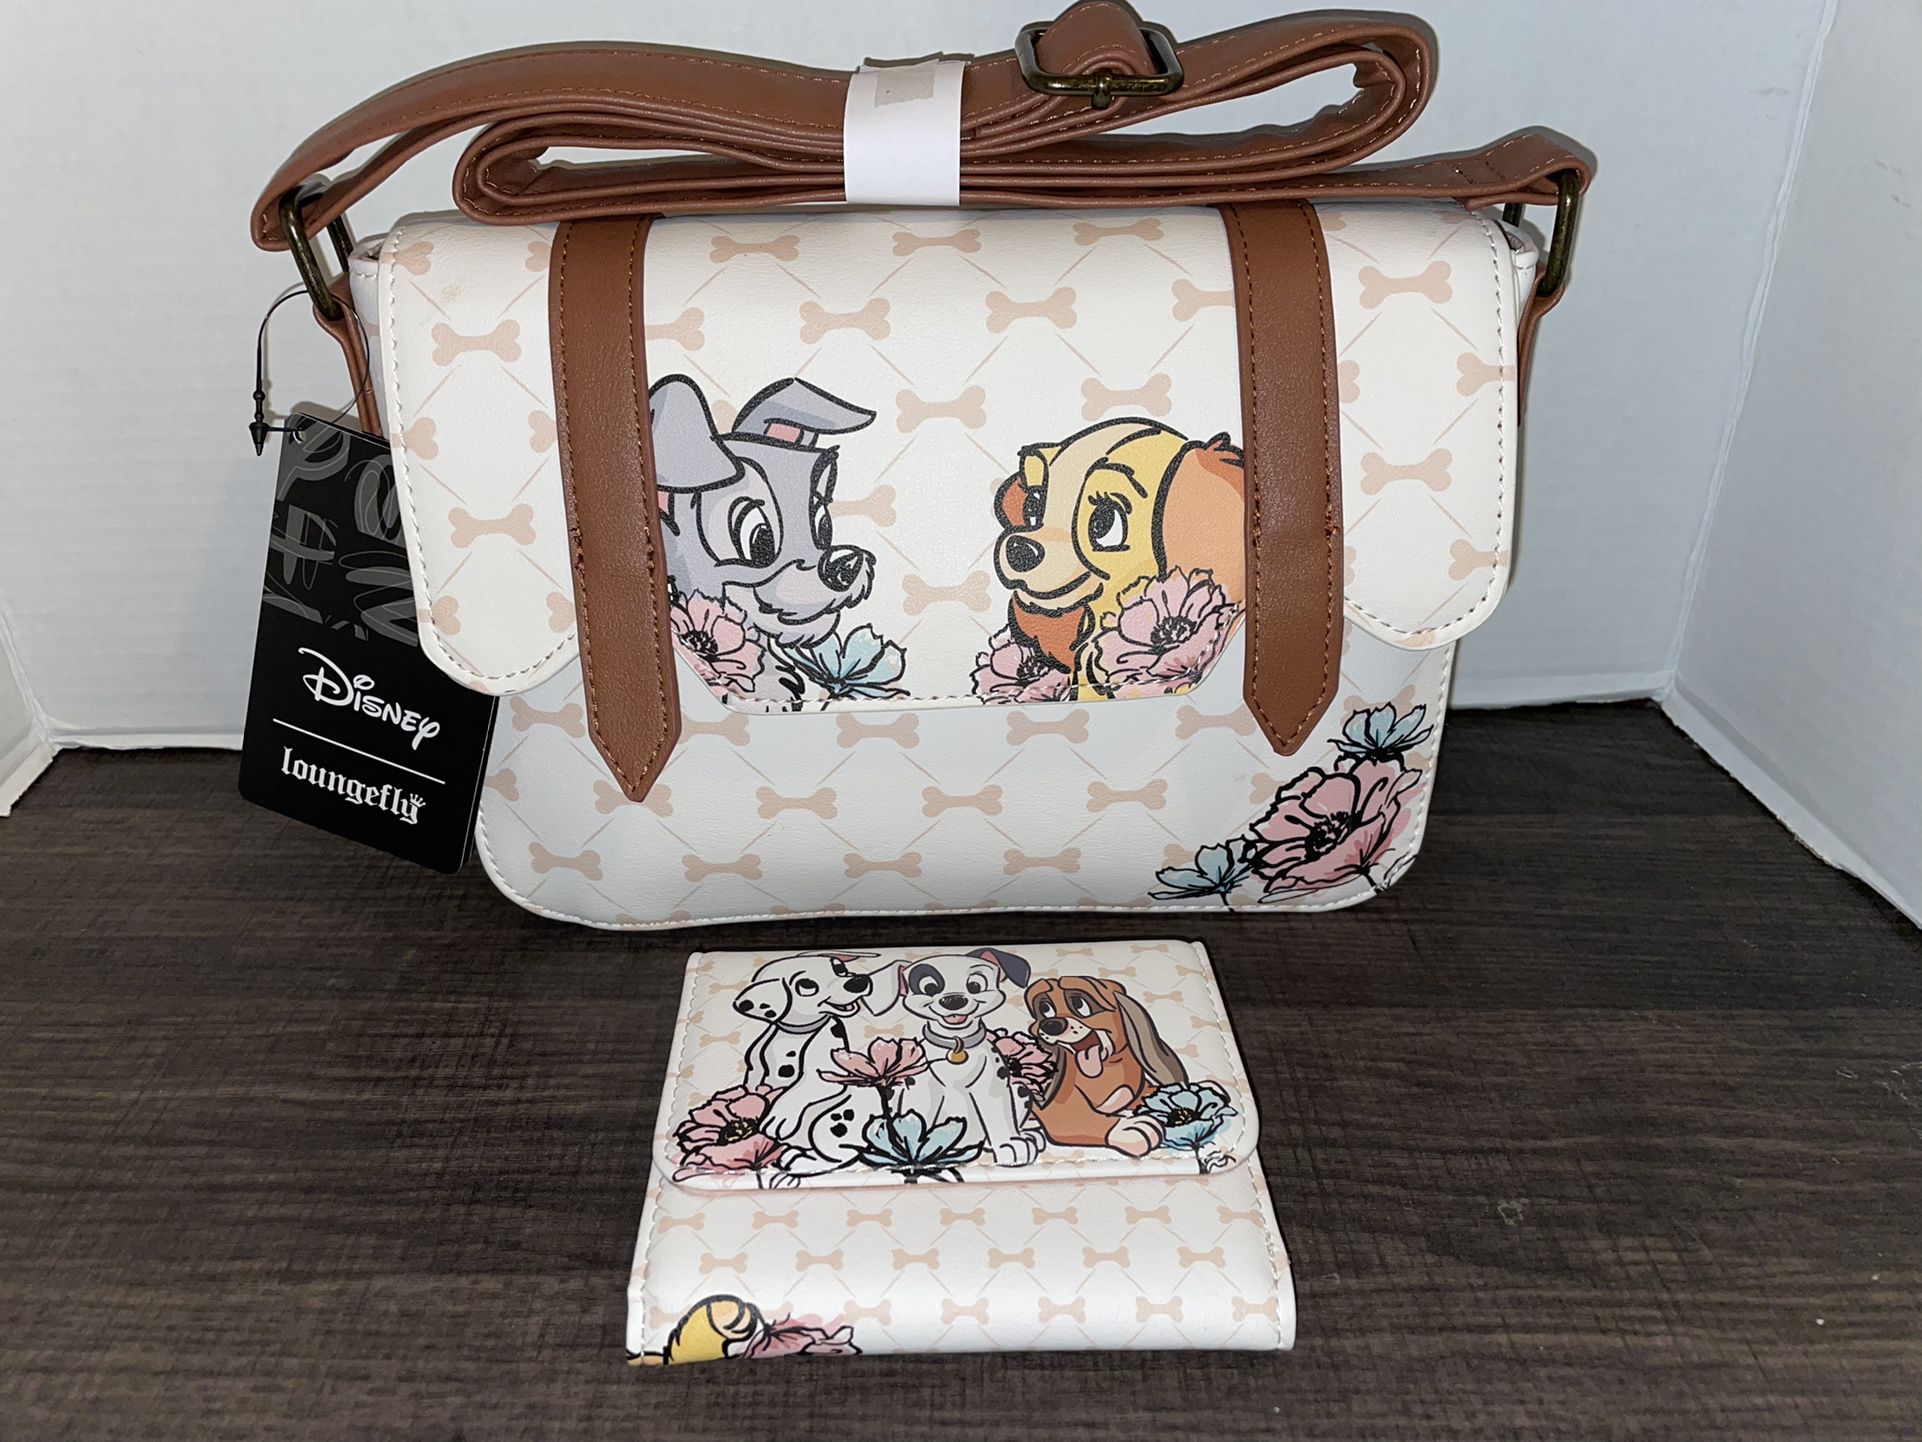 Disney Dogs Loungefly Crossbody Bag for Sale in Corona, CA - OfferUp